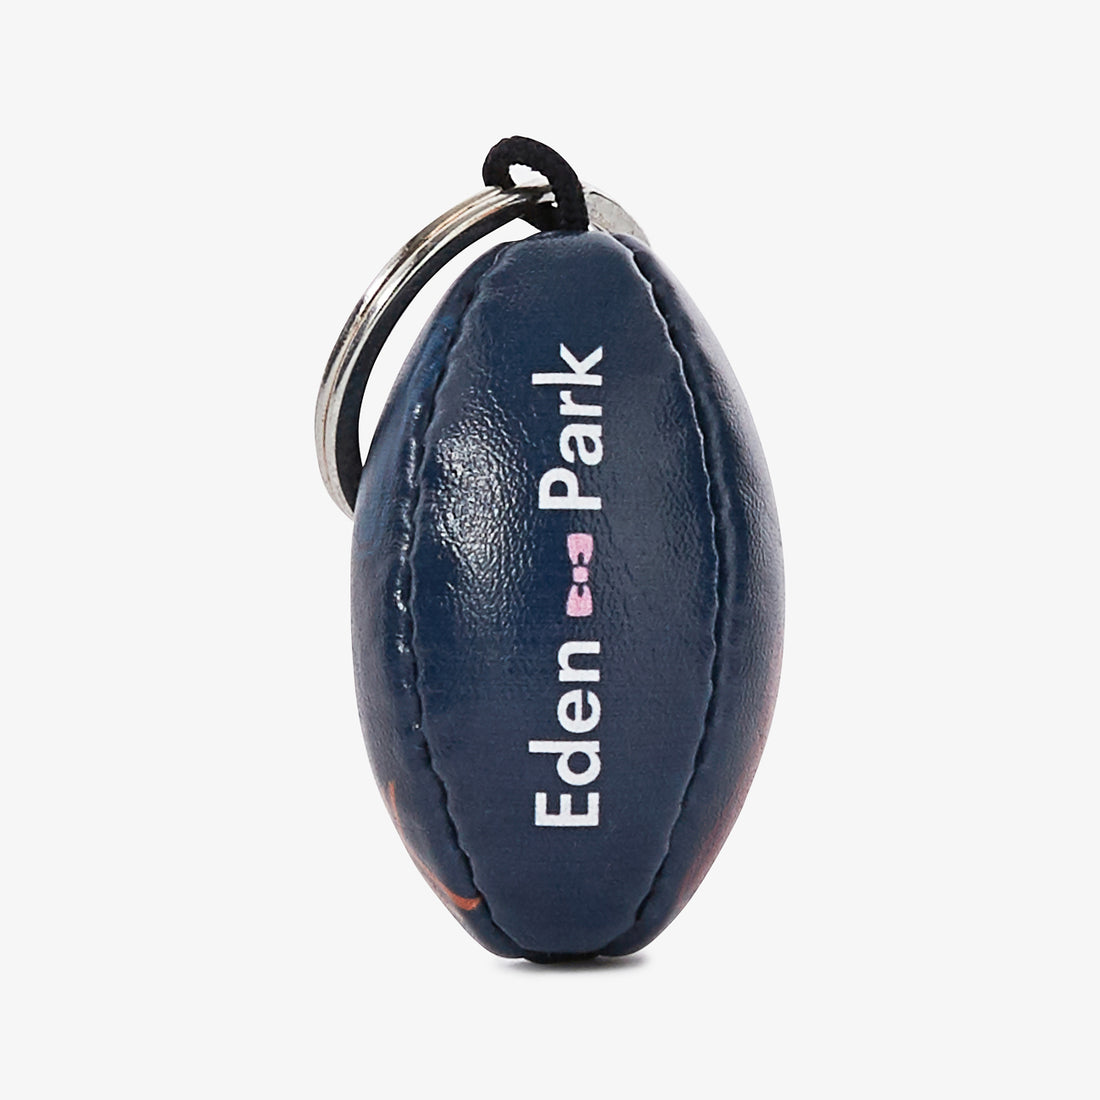 Blue Rugby Ball Keychain With Multicolored Screen Print